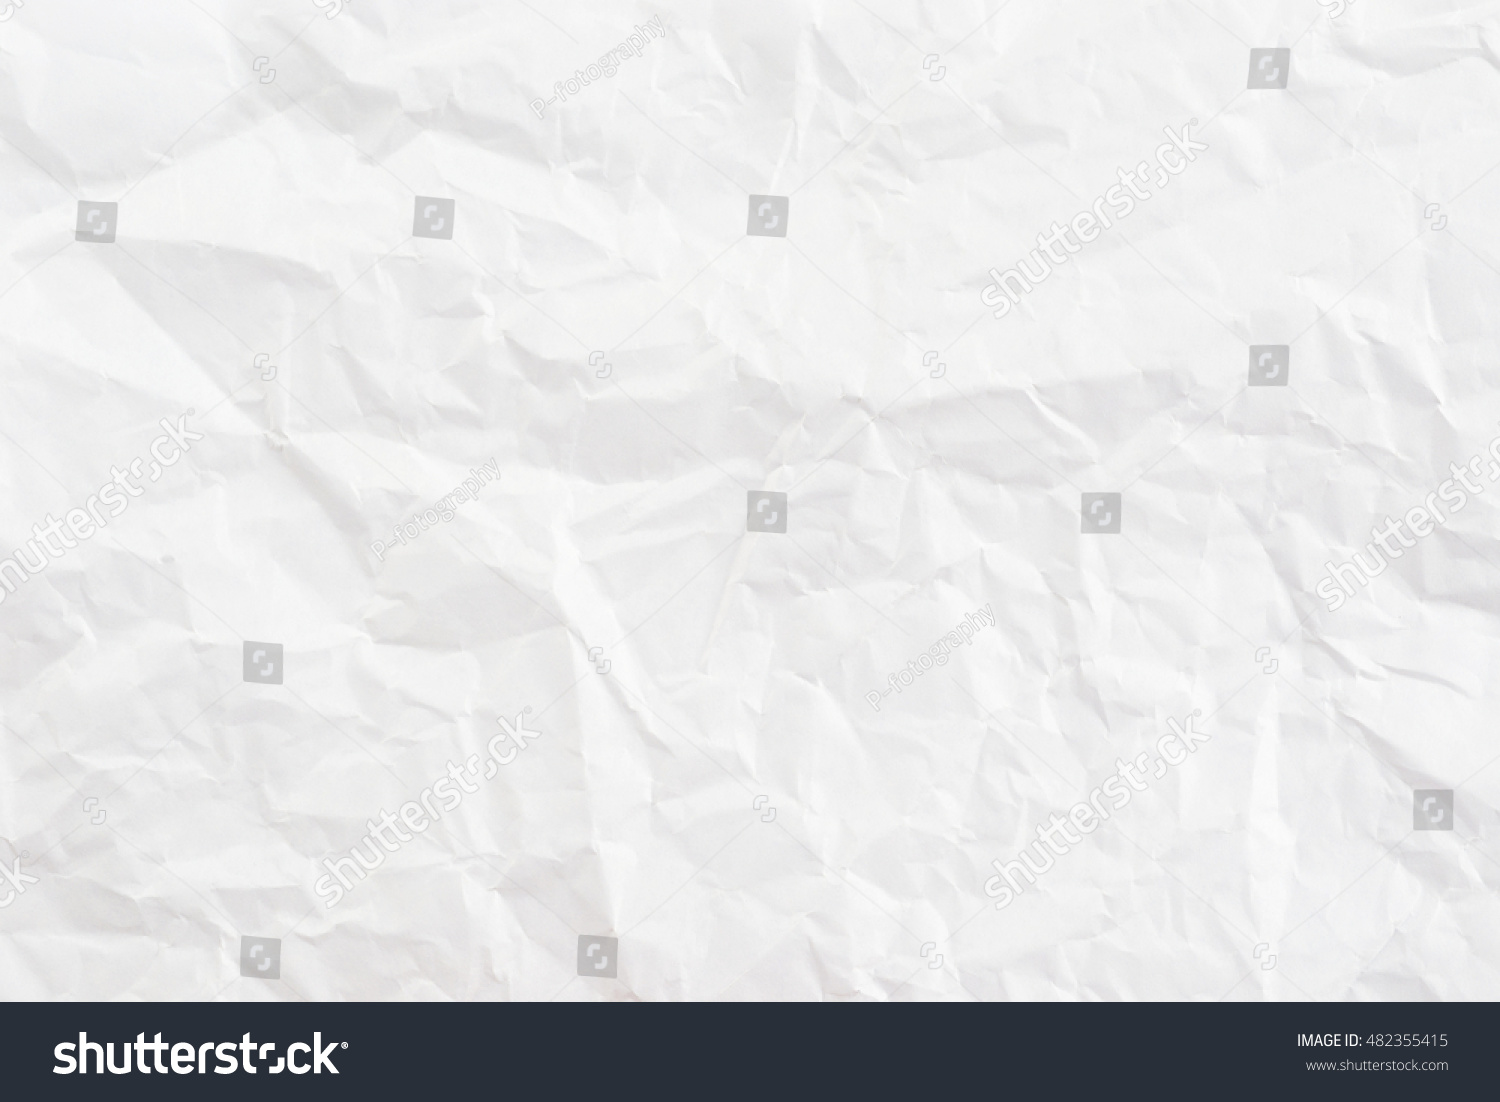 white crumpled paper texture background.
 #482355415